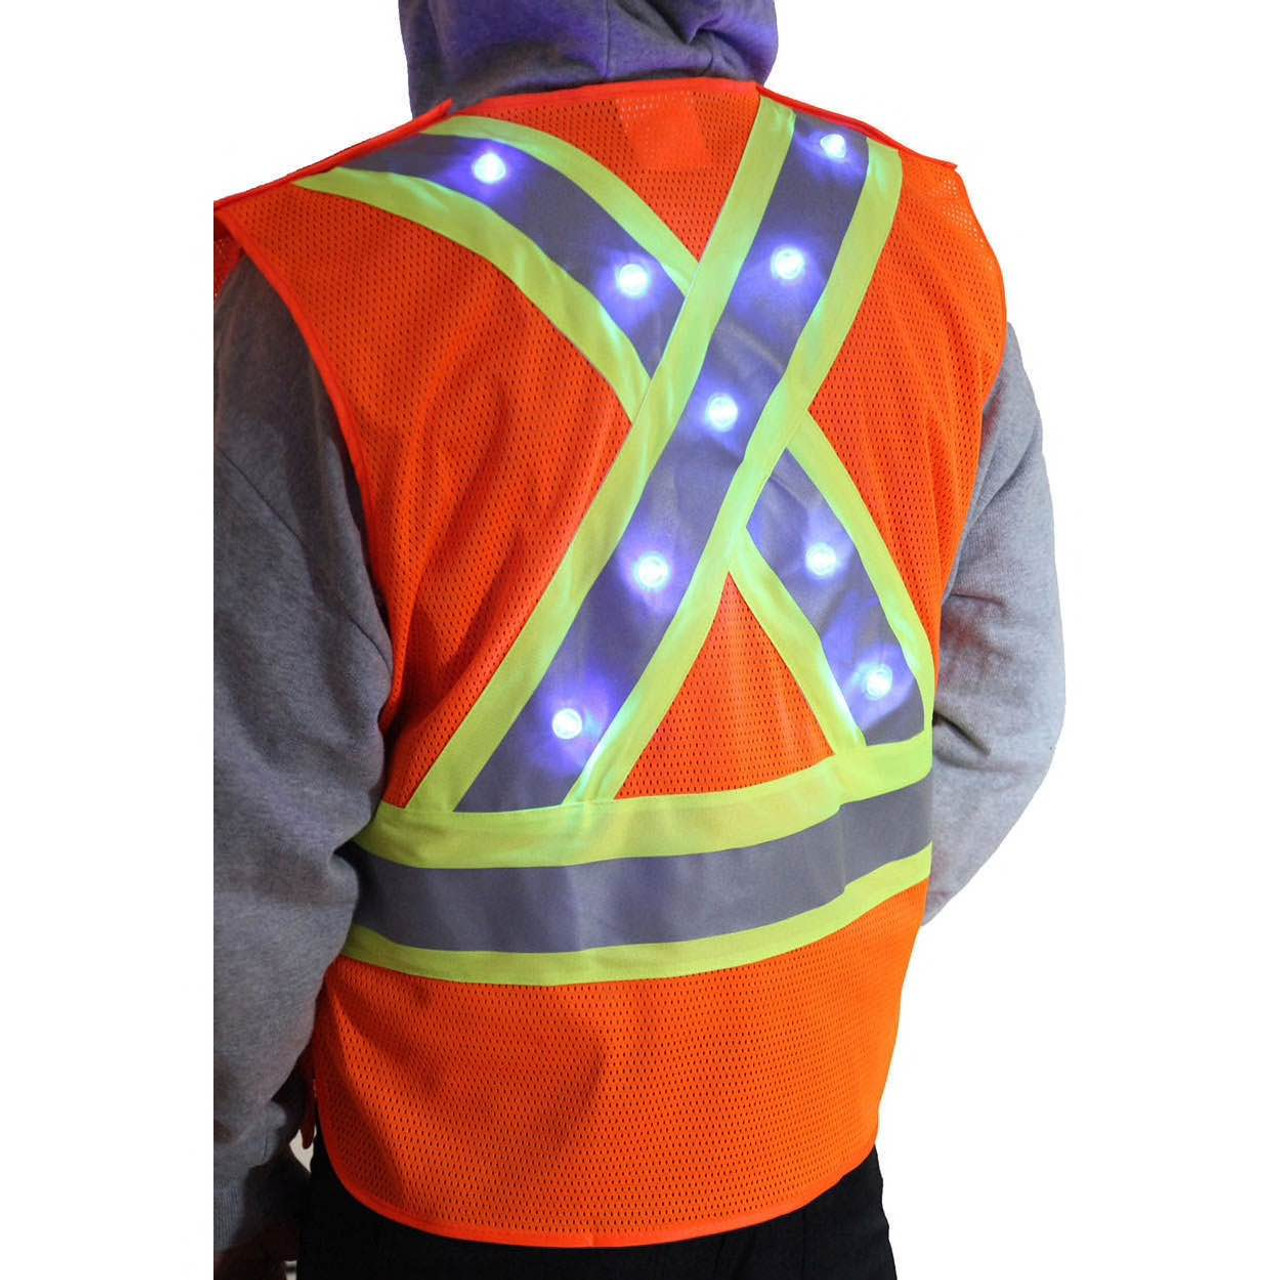 Two Tone High Visibility Reflective Red Safety Vest (X-Small-5XL